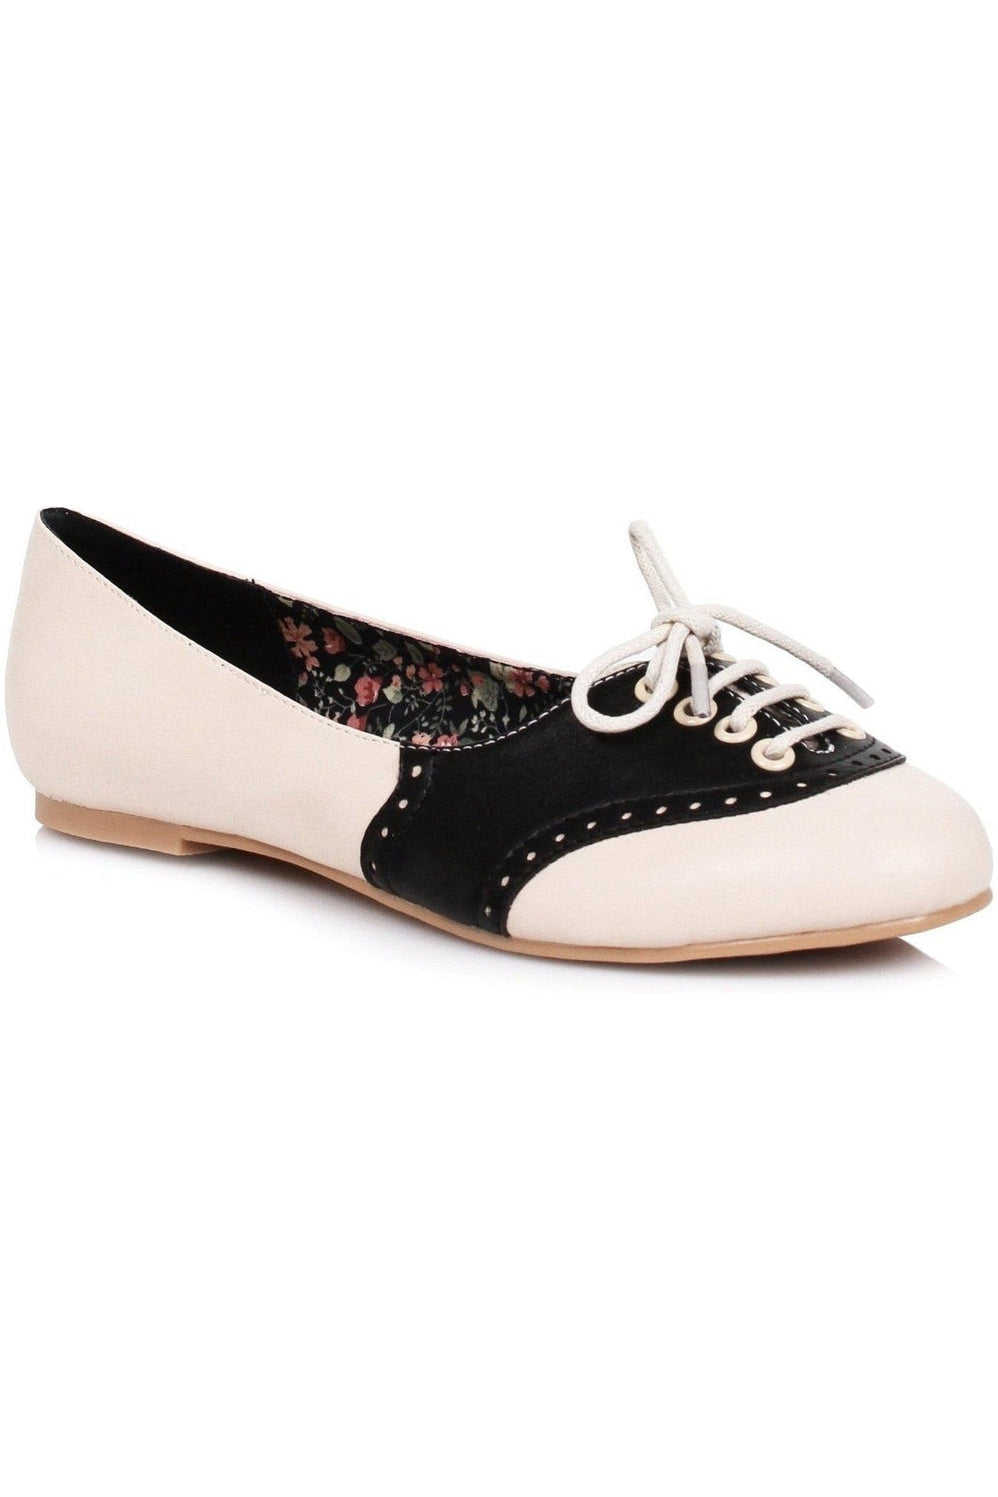 Bettie Paige Halle Oxford Flat | Black Faux Leather-Bettie Page by Ellie-SEXYSHOES.COM